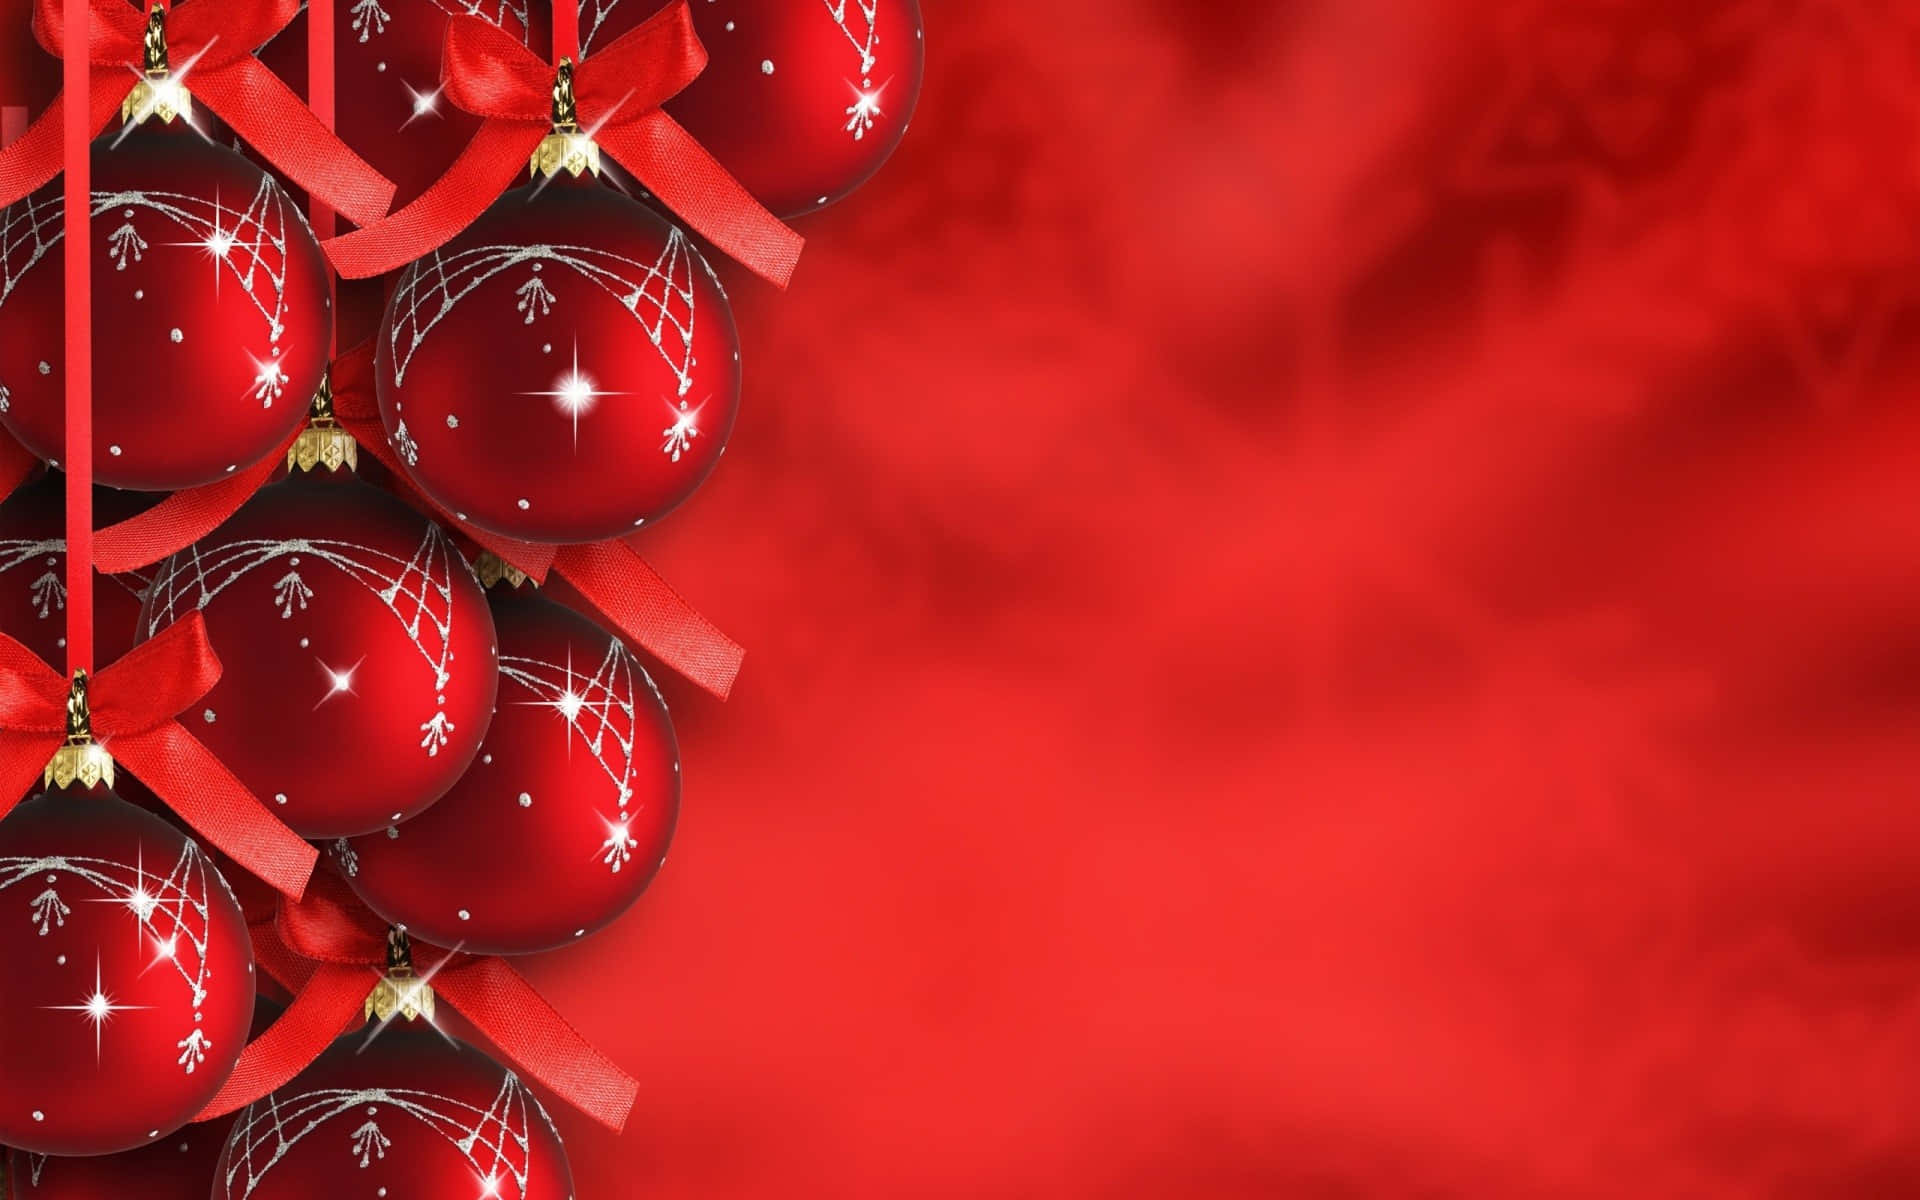 "Celebrate the Holidays - High Resolution Christmas Background"